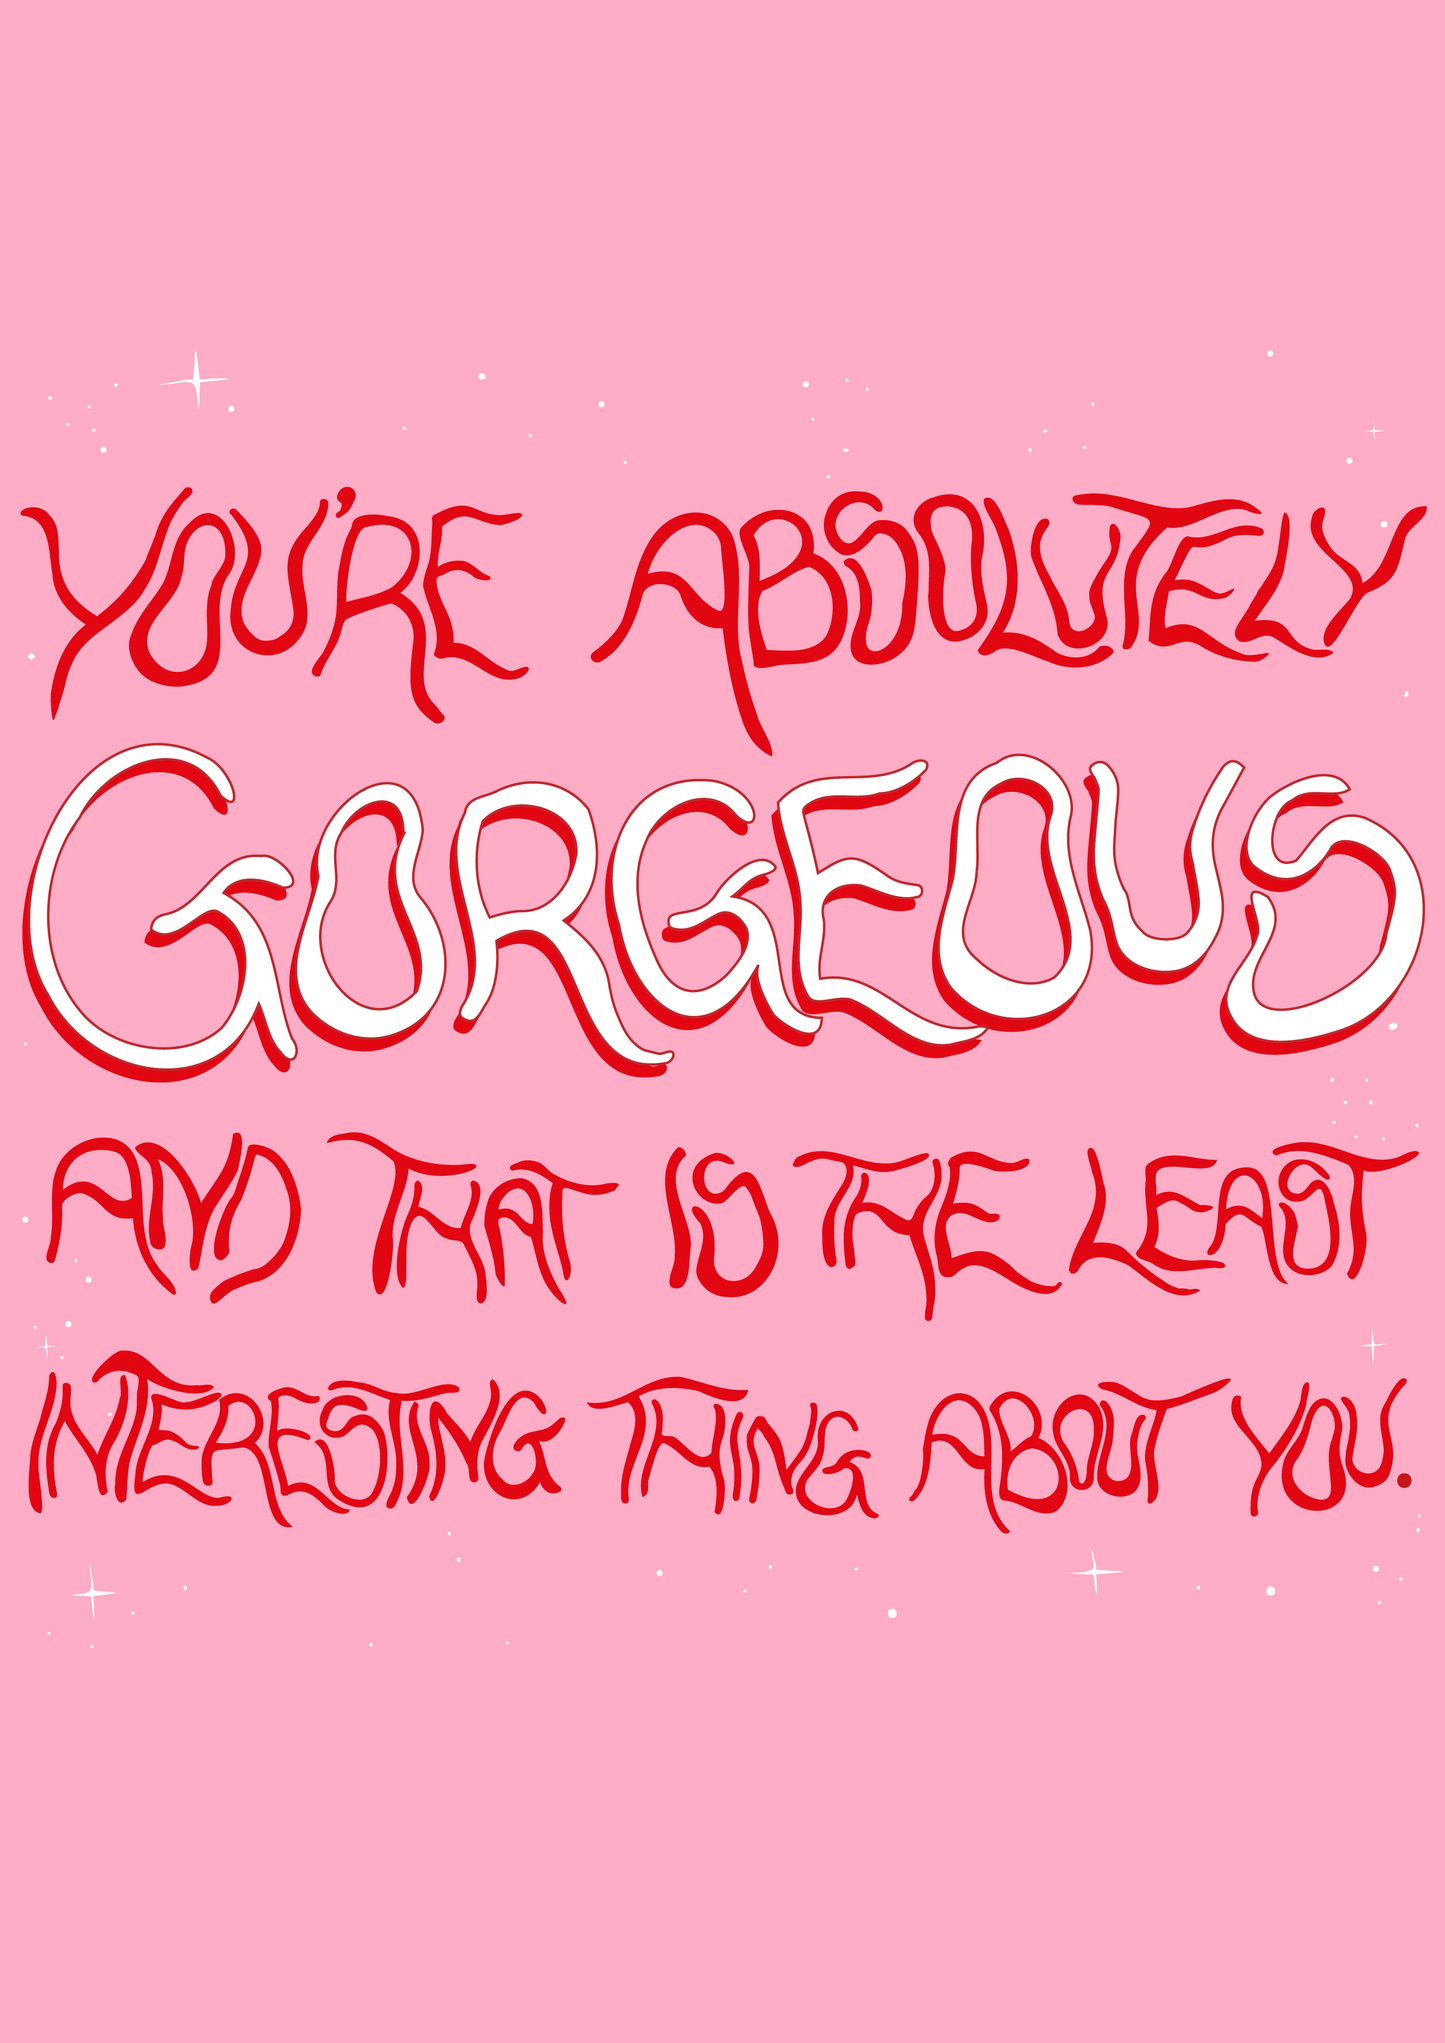 you're absolutely gorgeous and that is the least interesting thing about you.